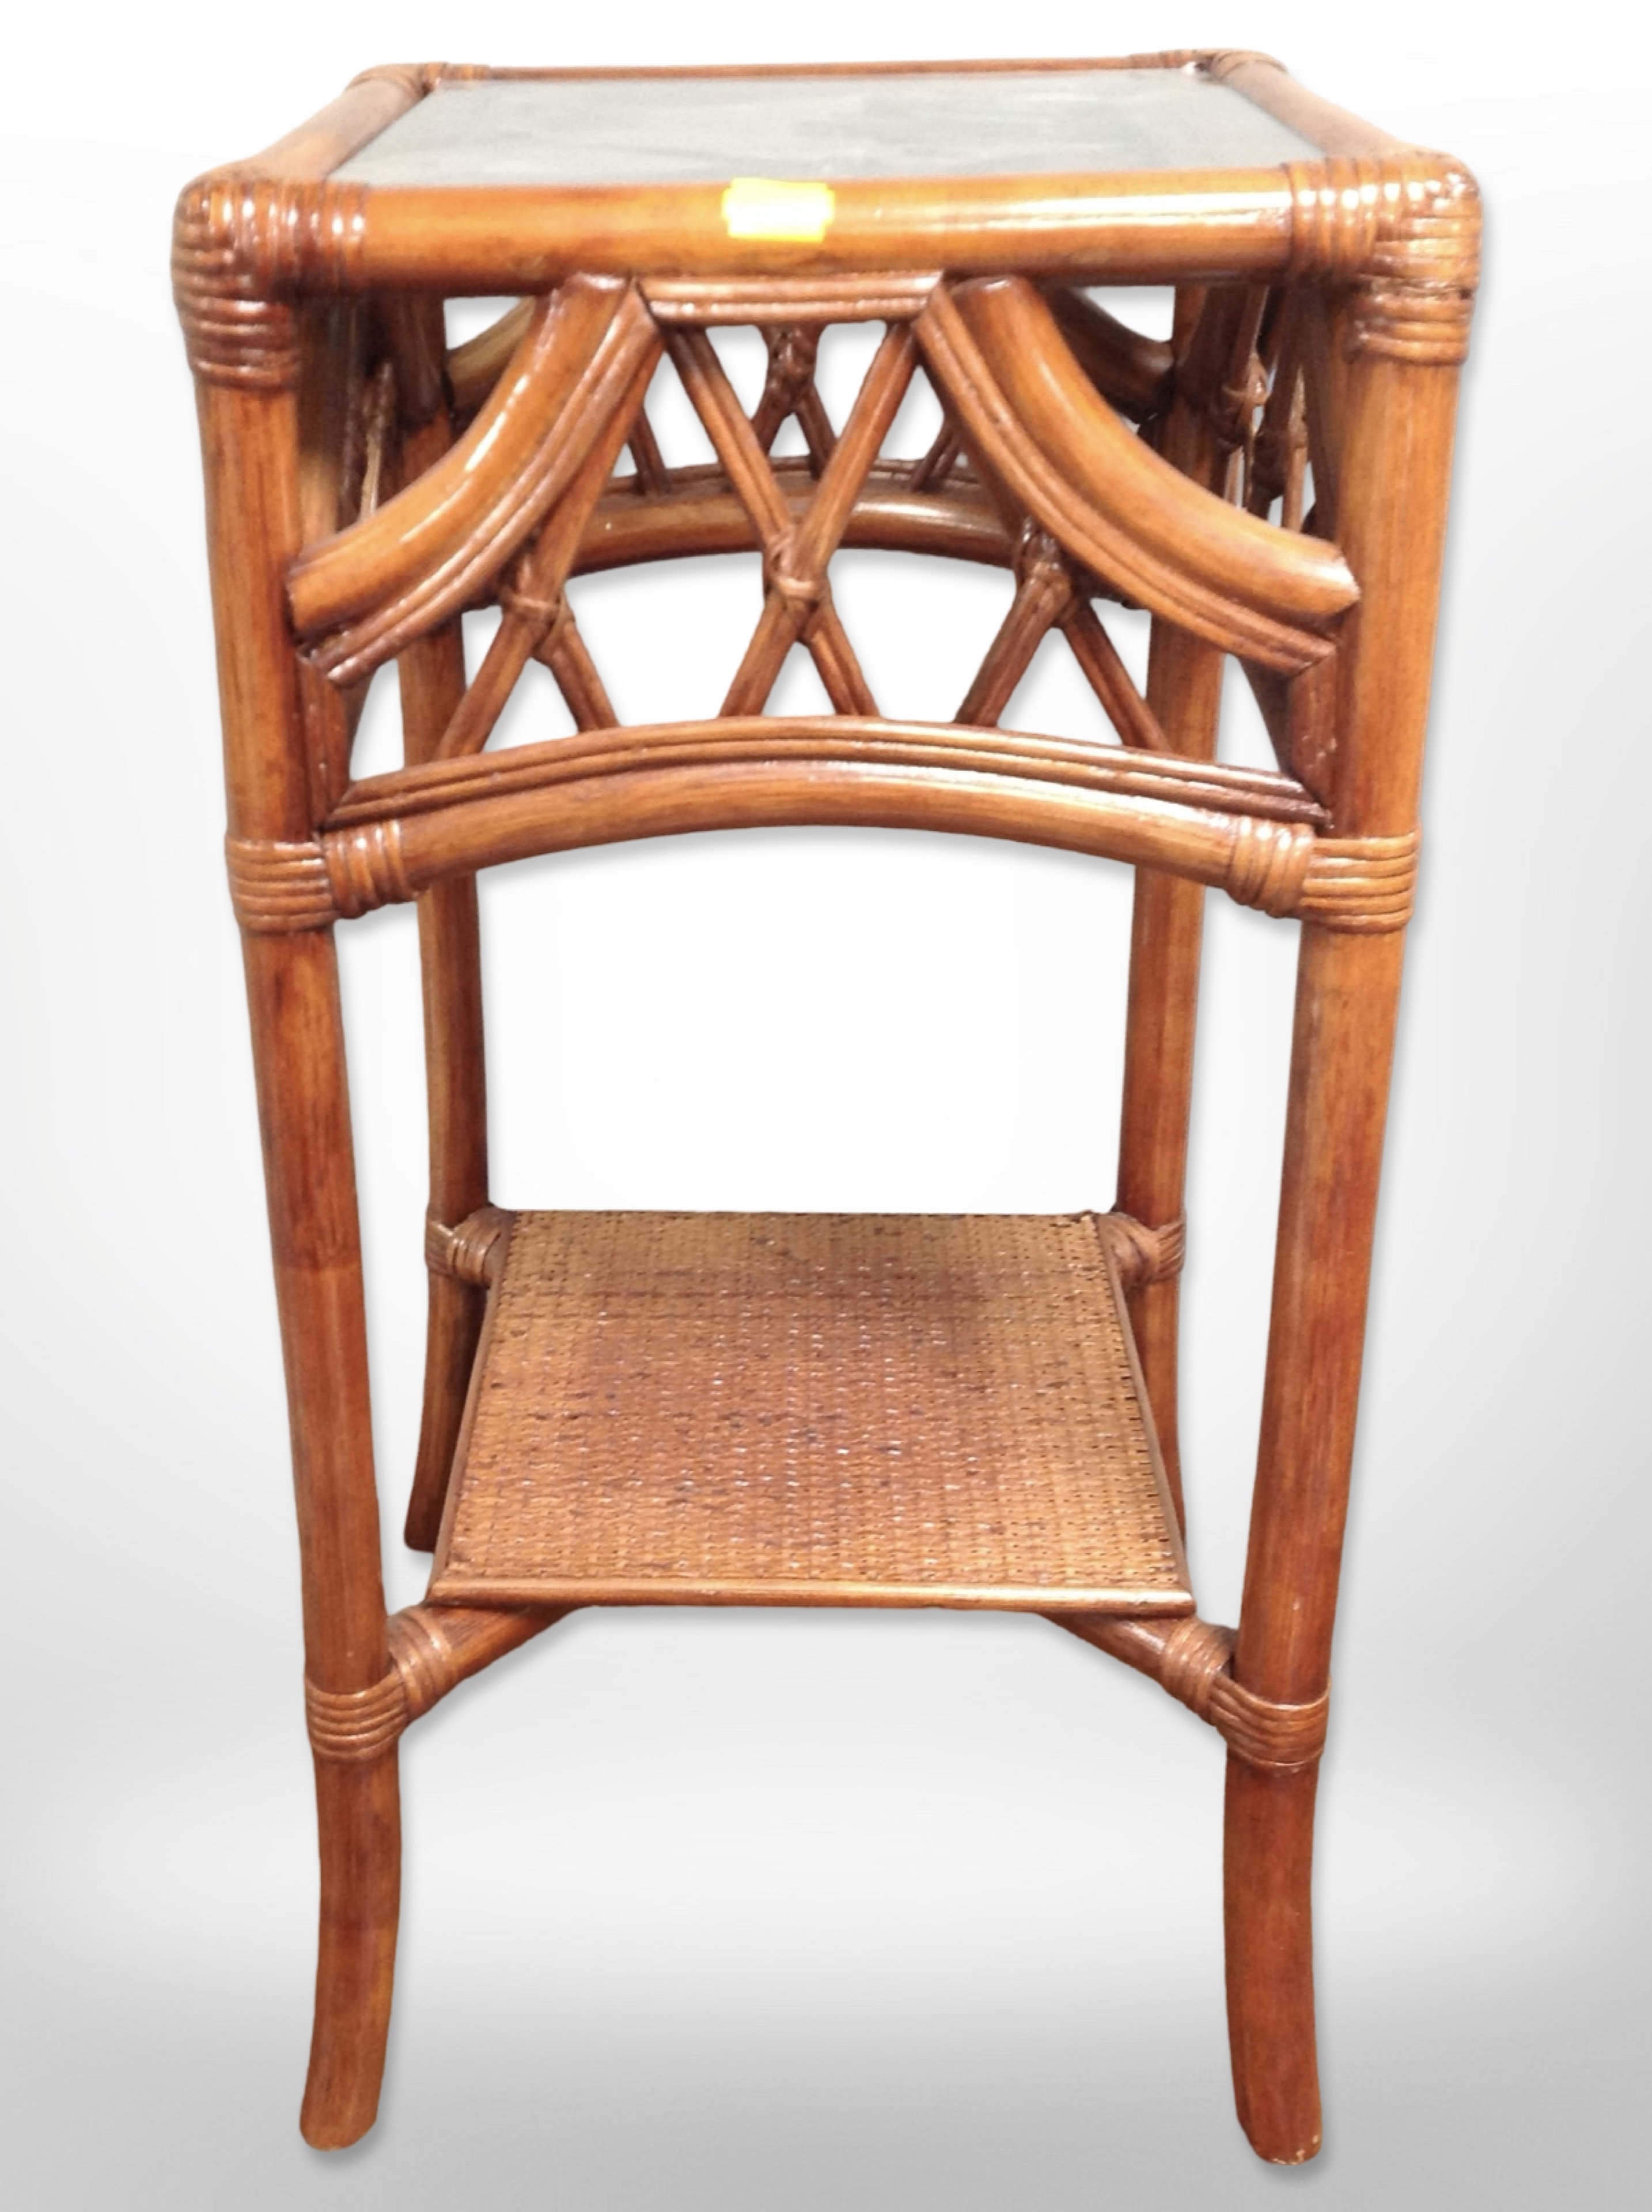 A bamboo and wicker stand, height 63cm.